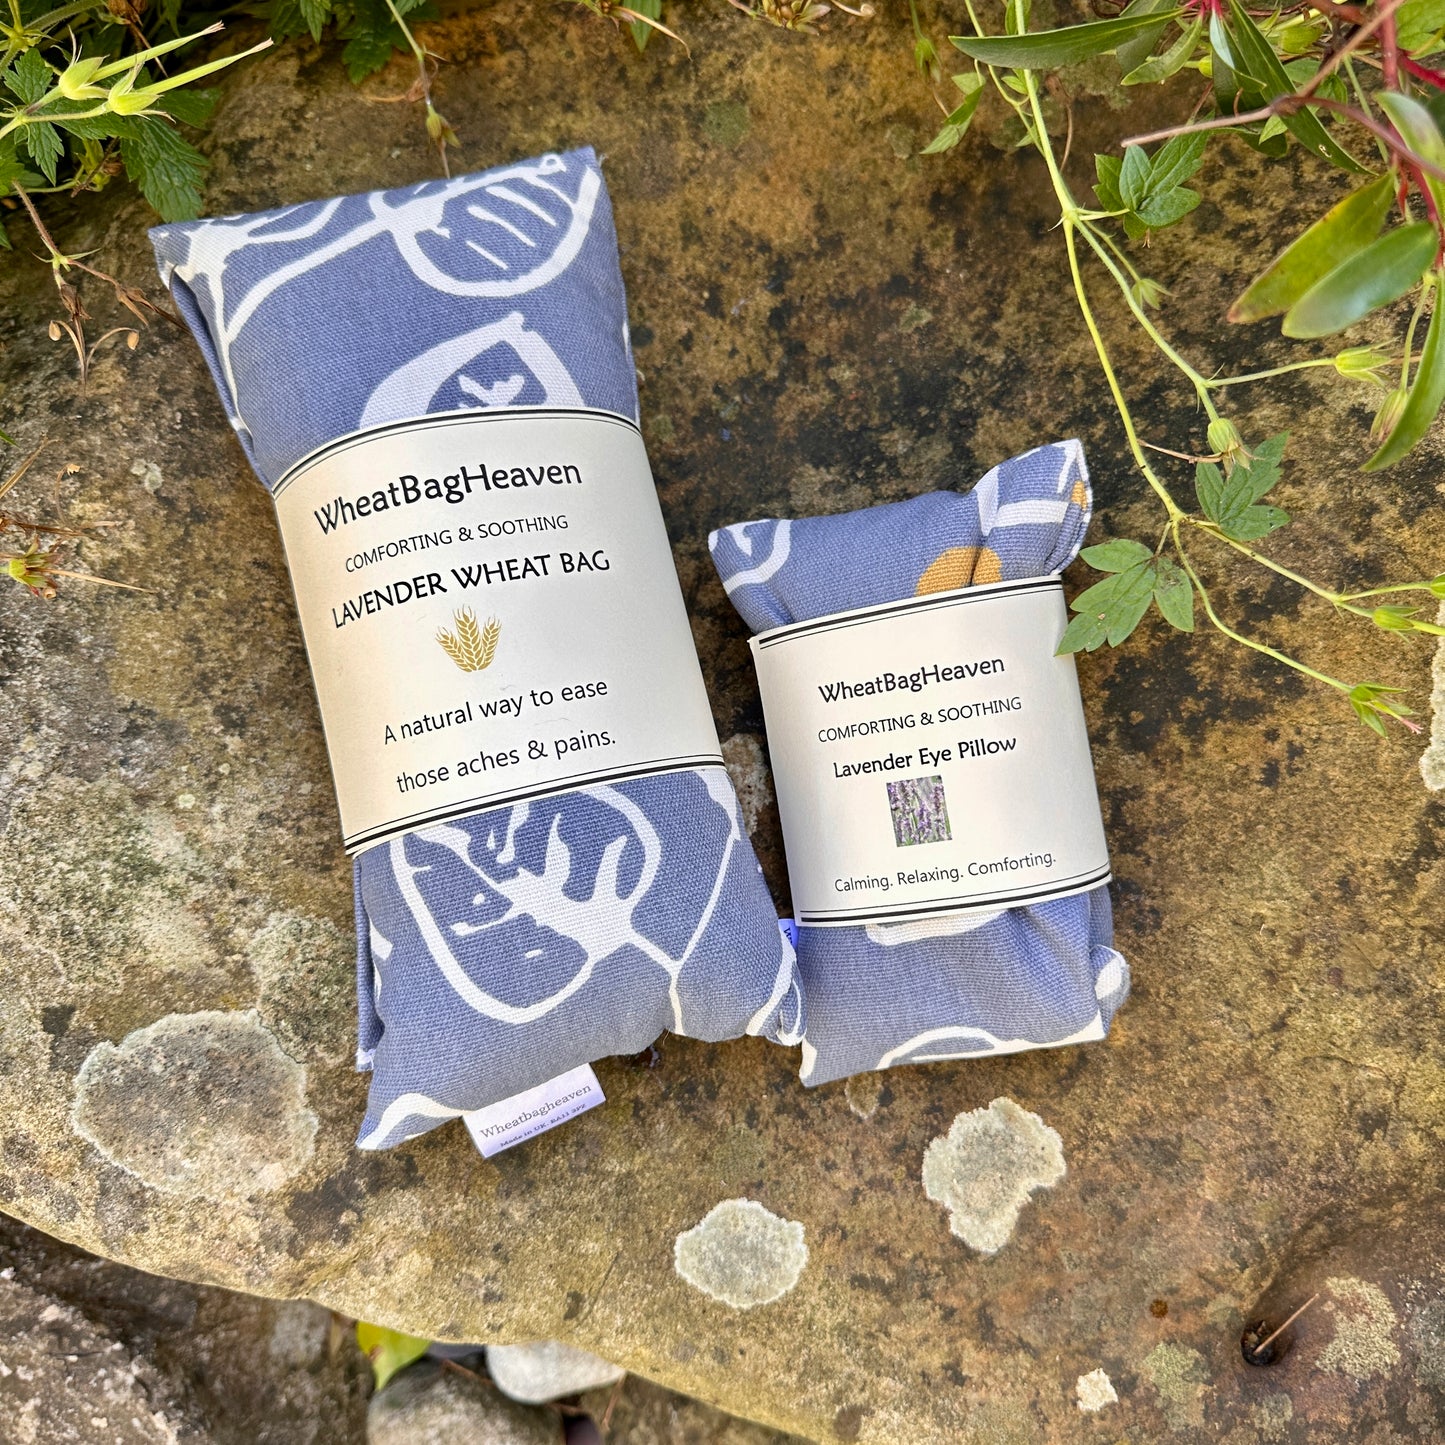 denim blue background with white leaf and yellow berry print. wheat bag and eye pillow combination for self care and wellbeing. handmade by wheat bag heaven and pictured on a rock side by side